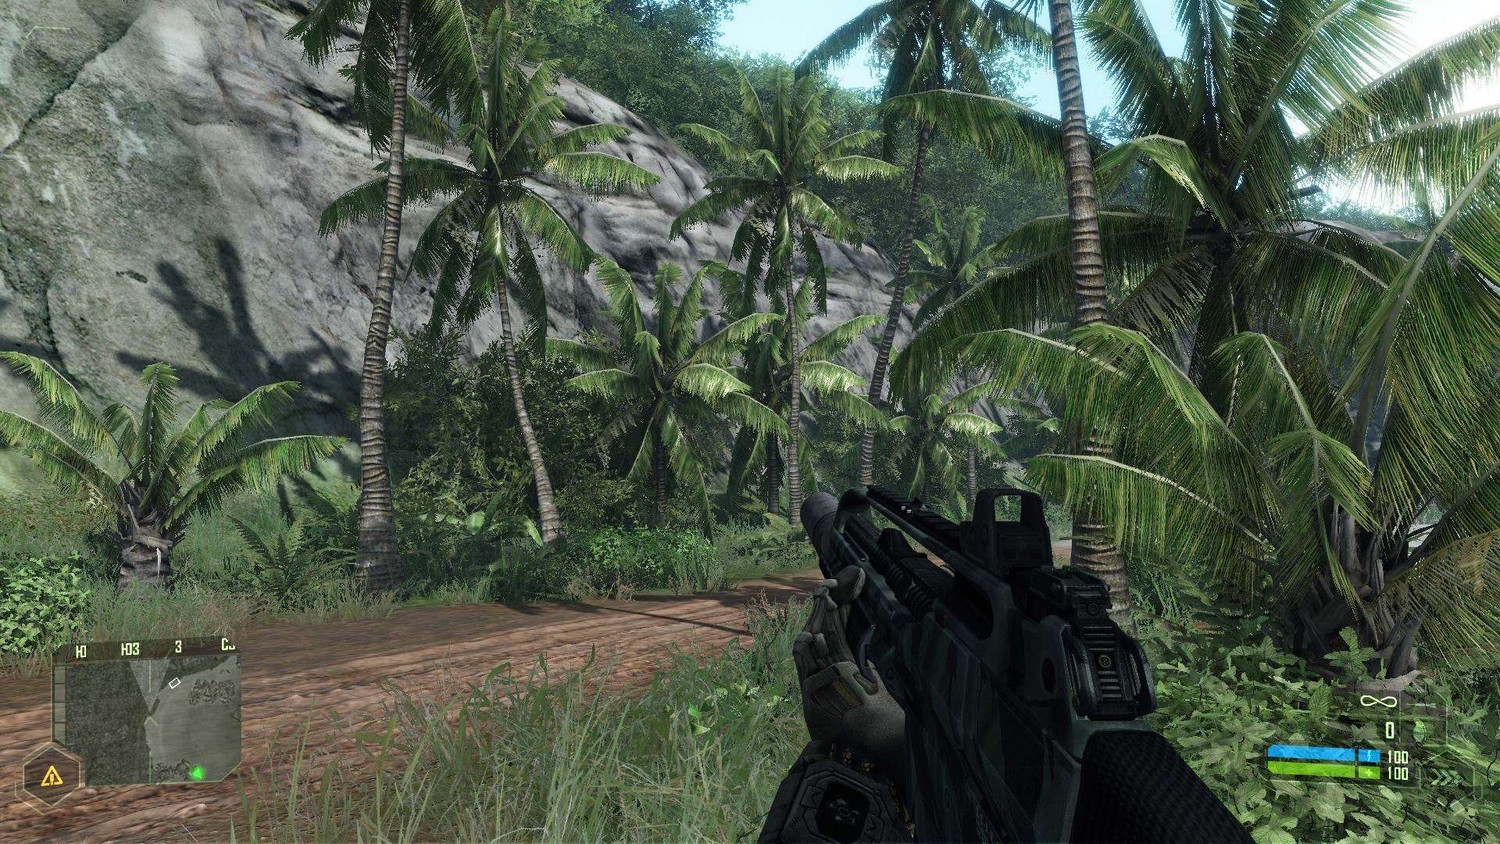 Crysis remastered на русском. Крайзис 1. Crysis 1 Remastered. Crysis 1 Скаут. Crysis Remastered 2007.